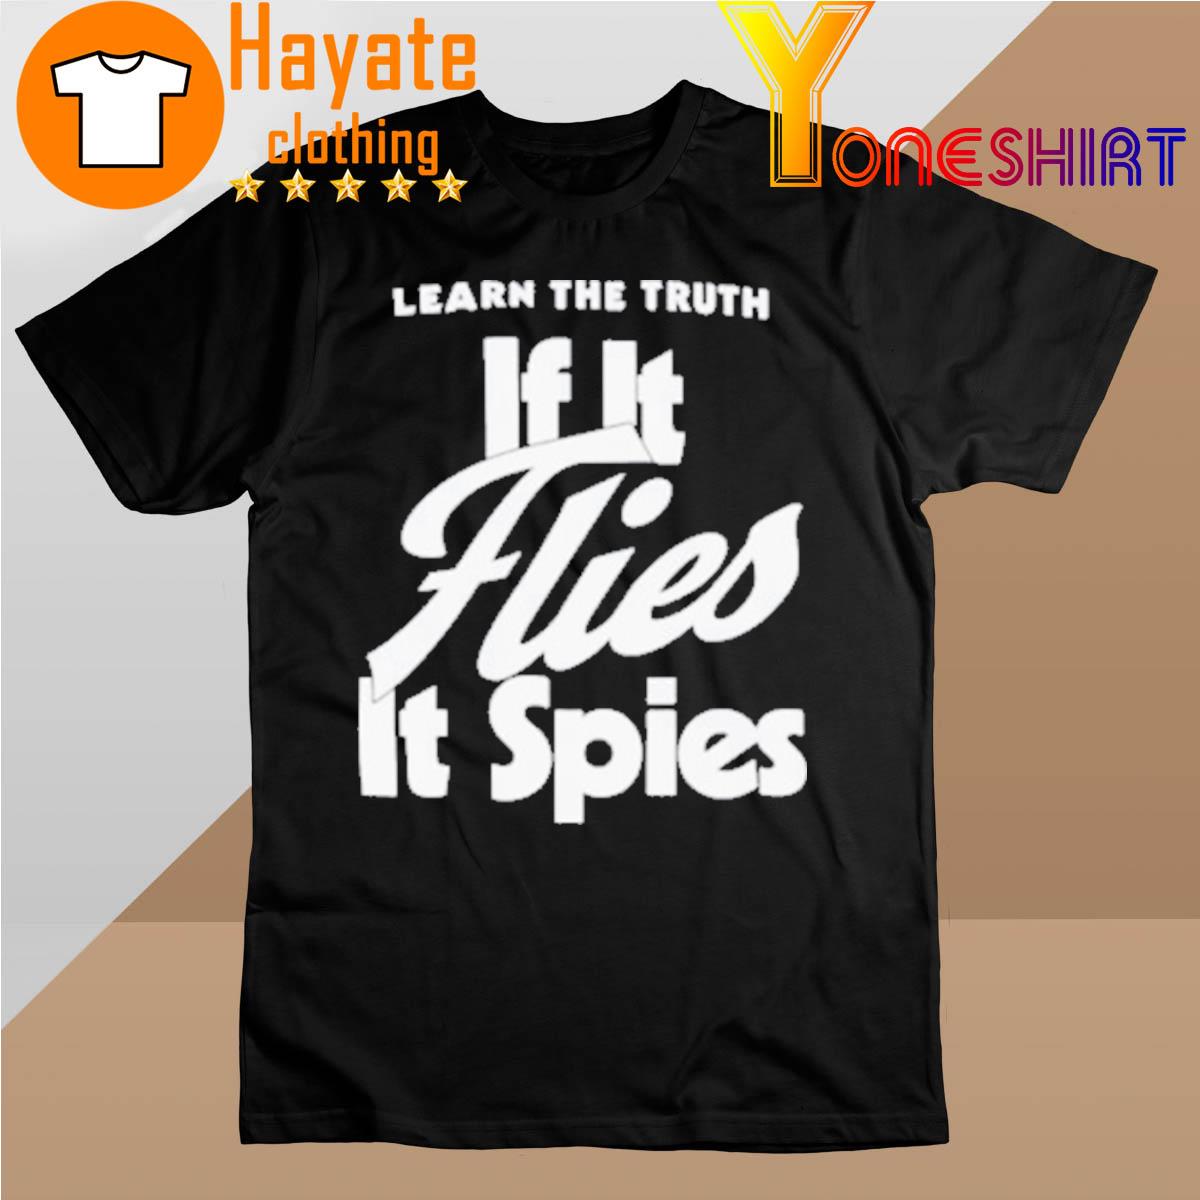 Learn The Truth If It Flies It Spies T-Shirt